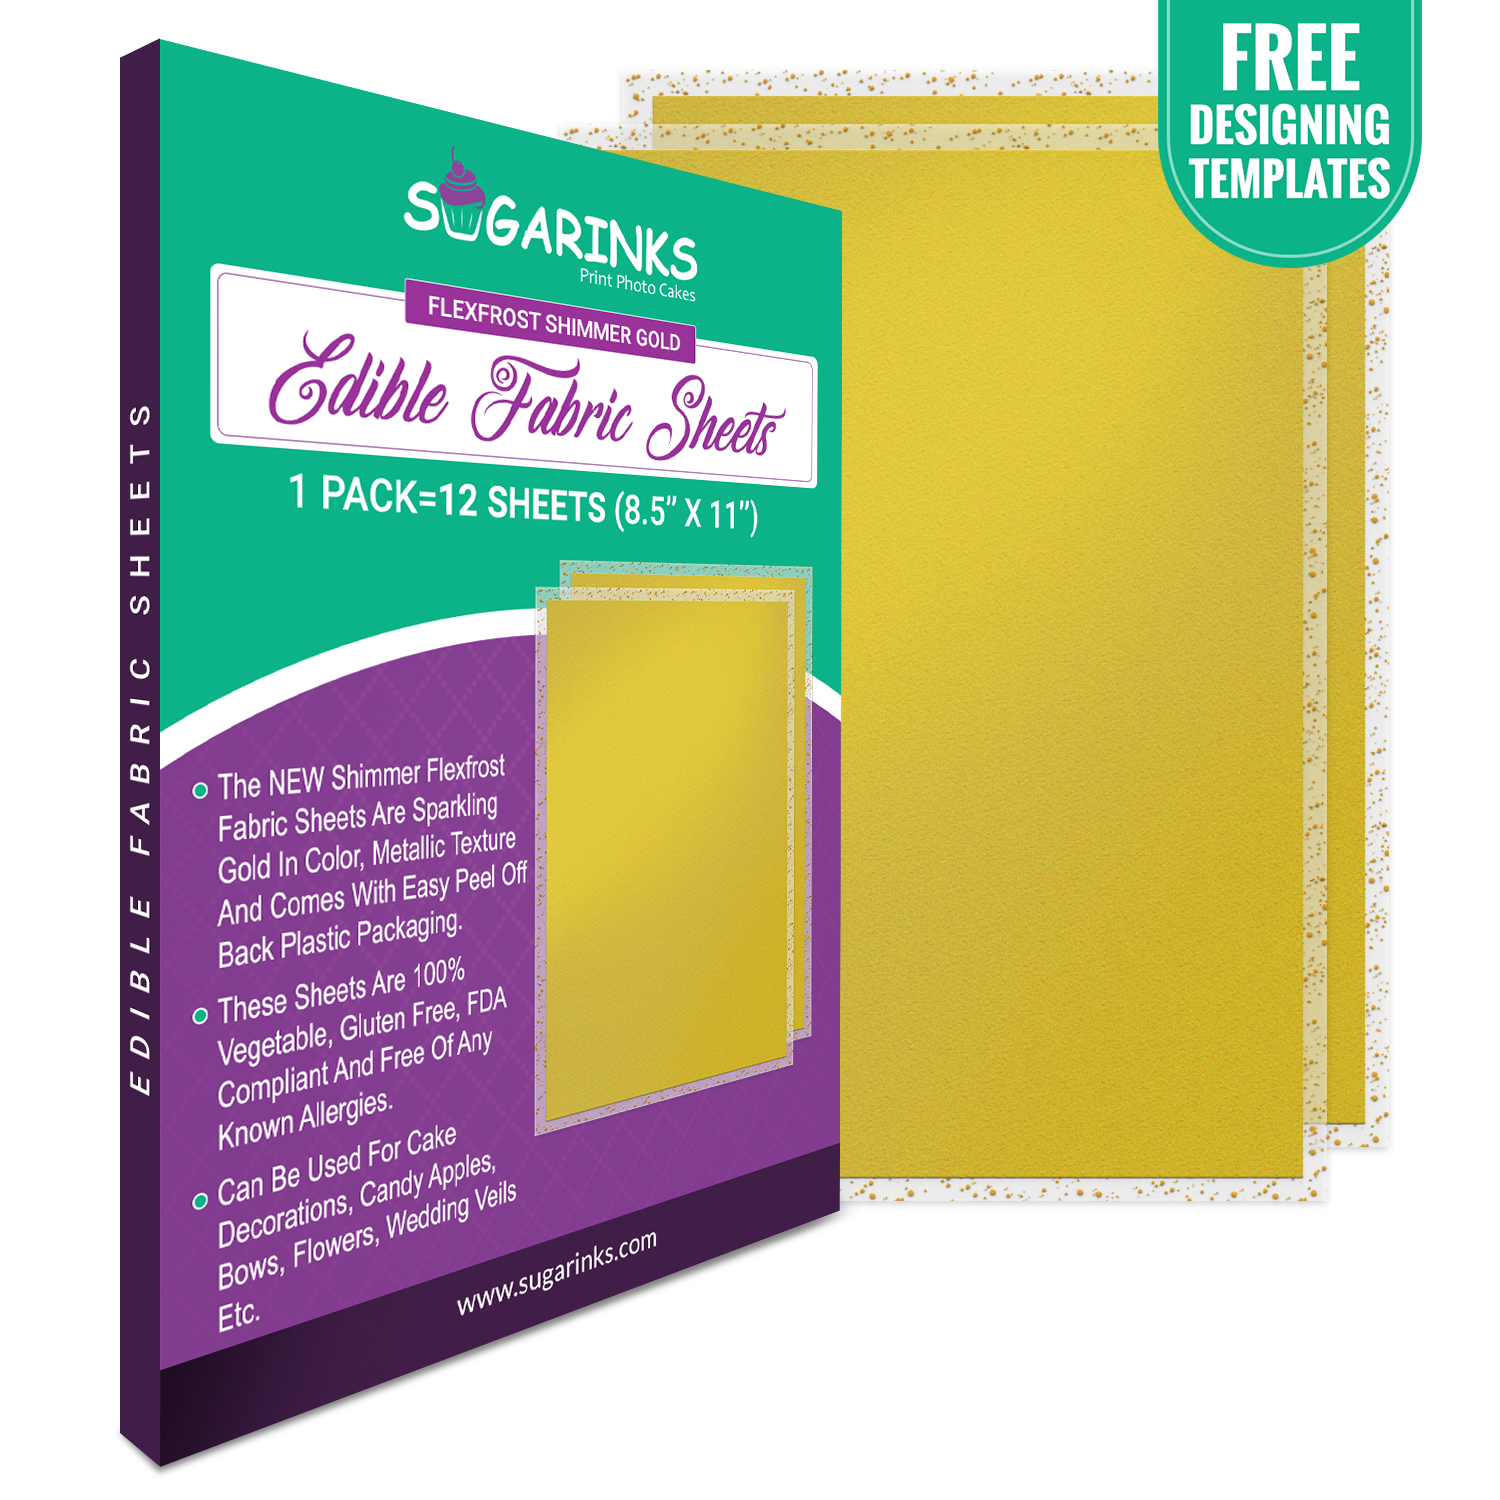 Sugarinks Premium Quality Flexfrost Shimmer Edible Fabric Sheets A4 Size (8.5”X11”) Pack of 12 – Sparkling Gold